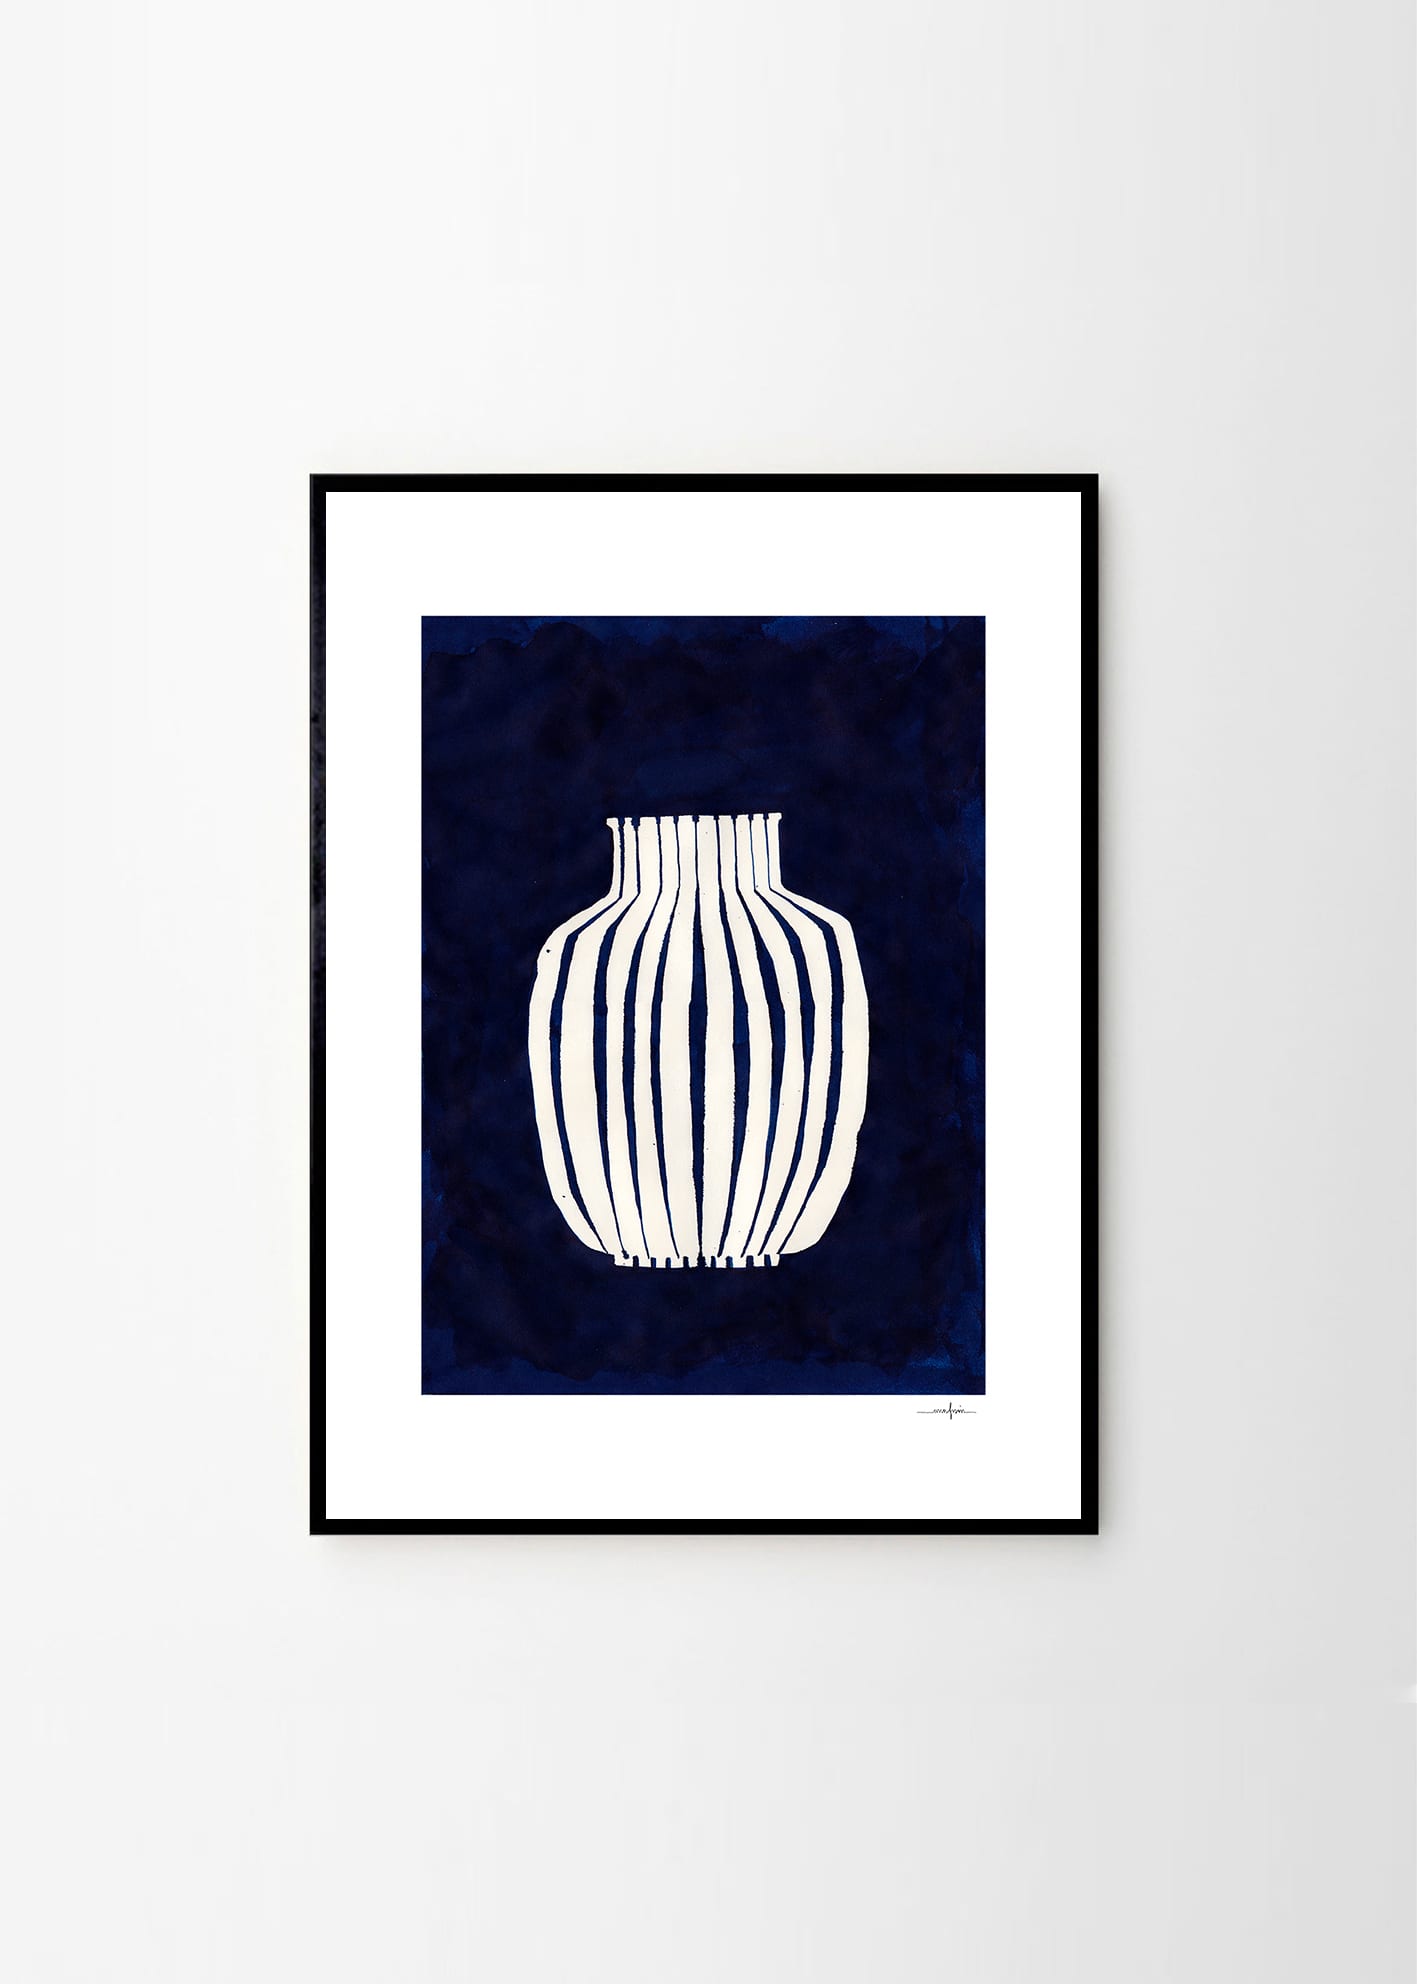 Ana Frois, Blue Vase art print - THE POSTER CLUB